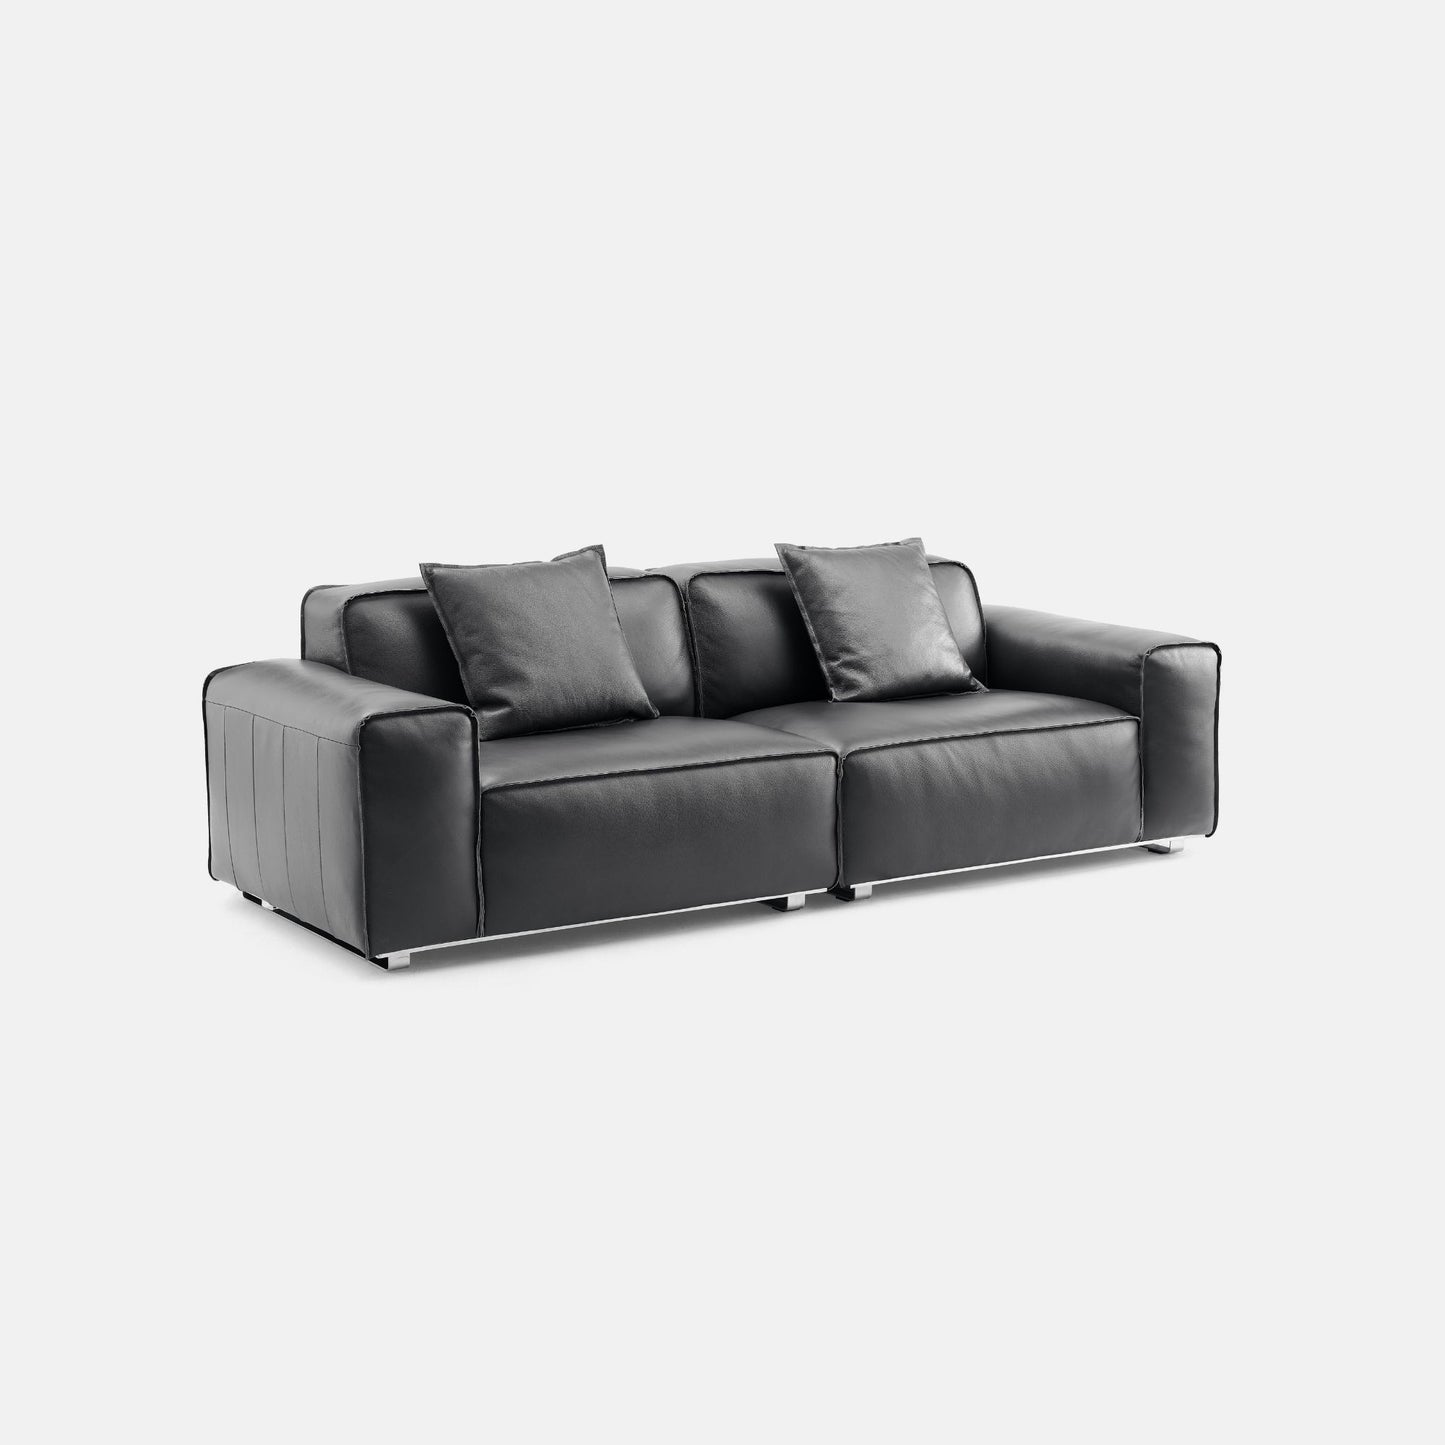 Colby black top grain full leather 2 seat sofa